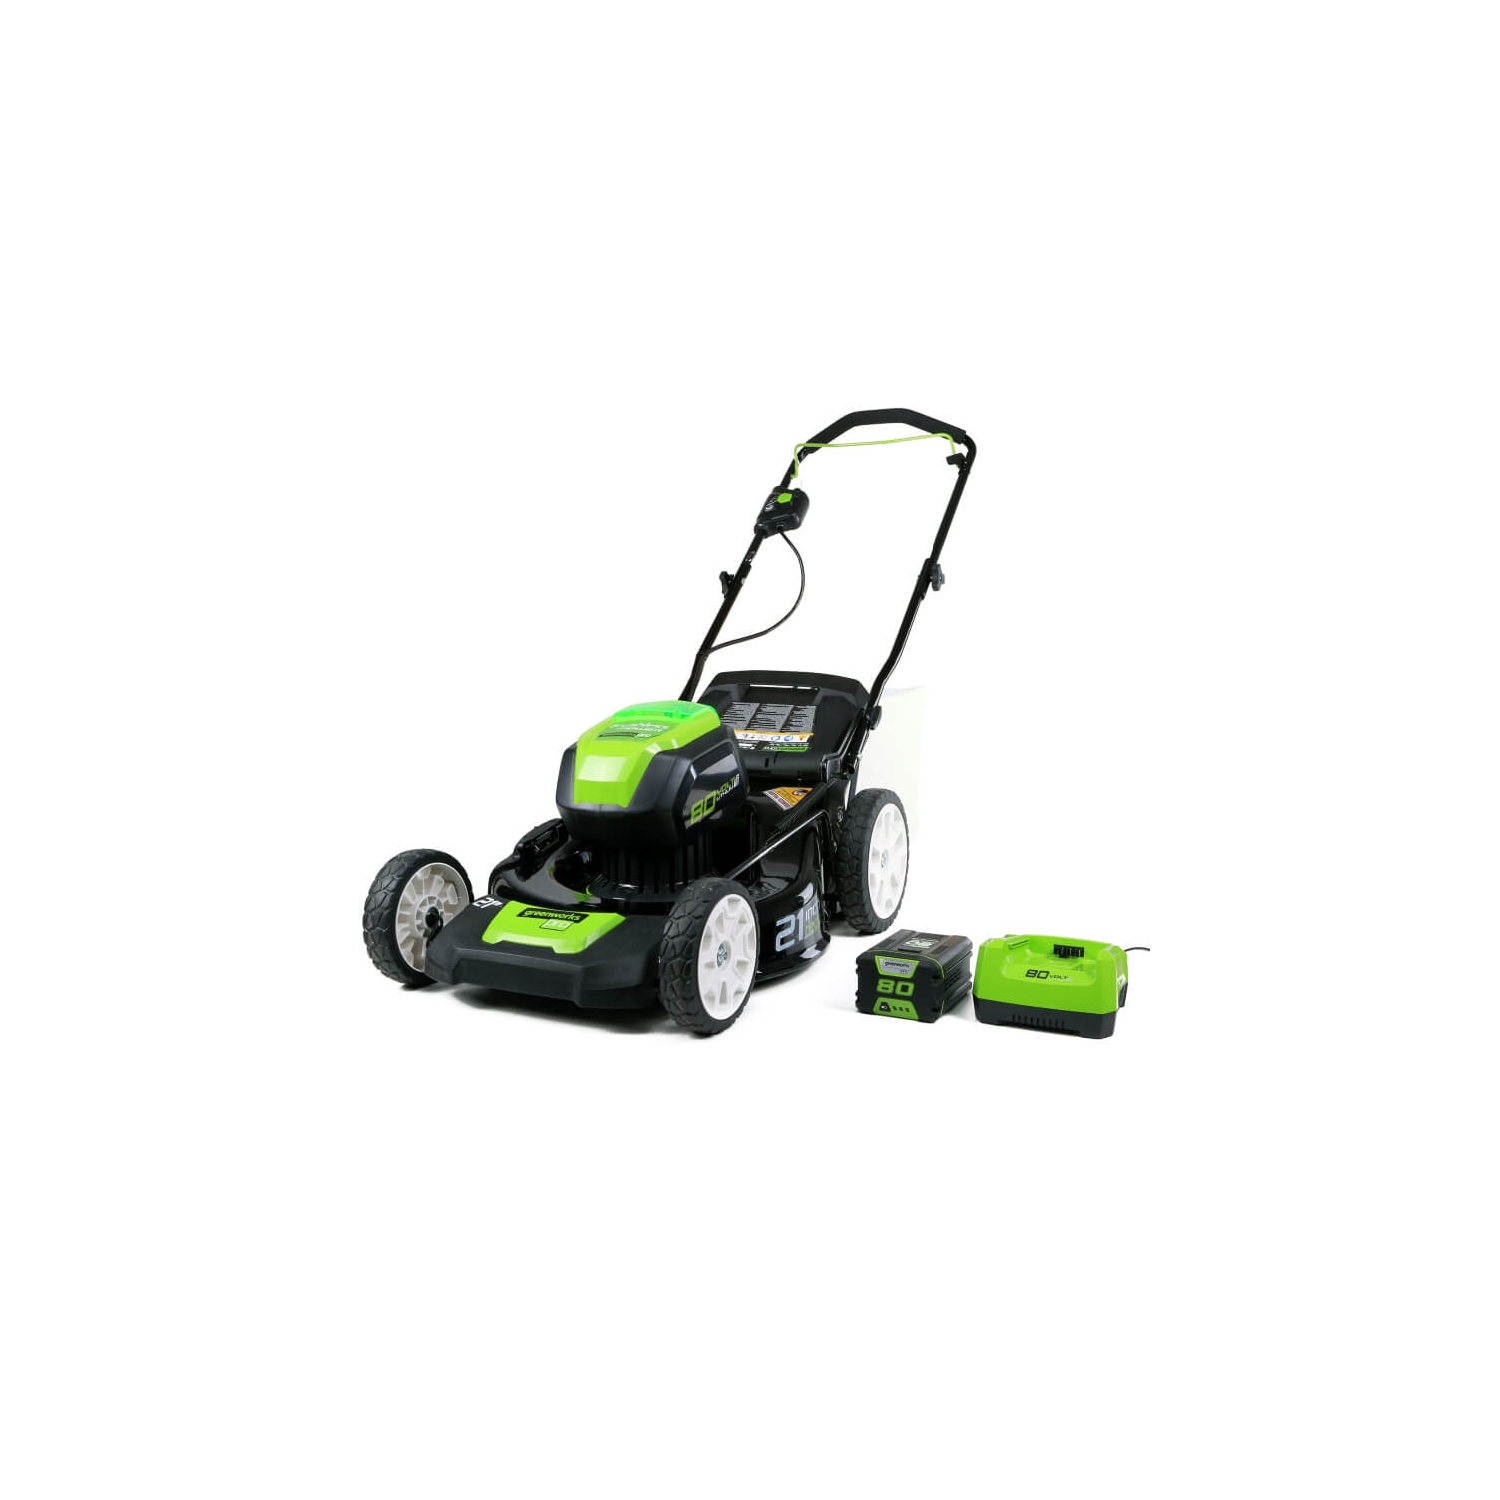 Greenworks 80V 21" Brushless Cordless Push Lawn Mower, (2) 2.0Ah Batteries and Charger Included [75+ Compatible Tools]